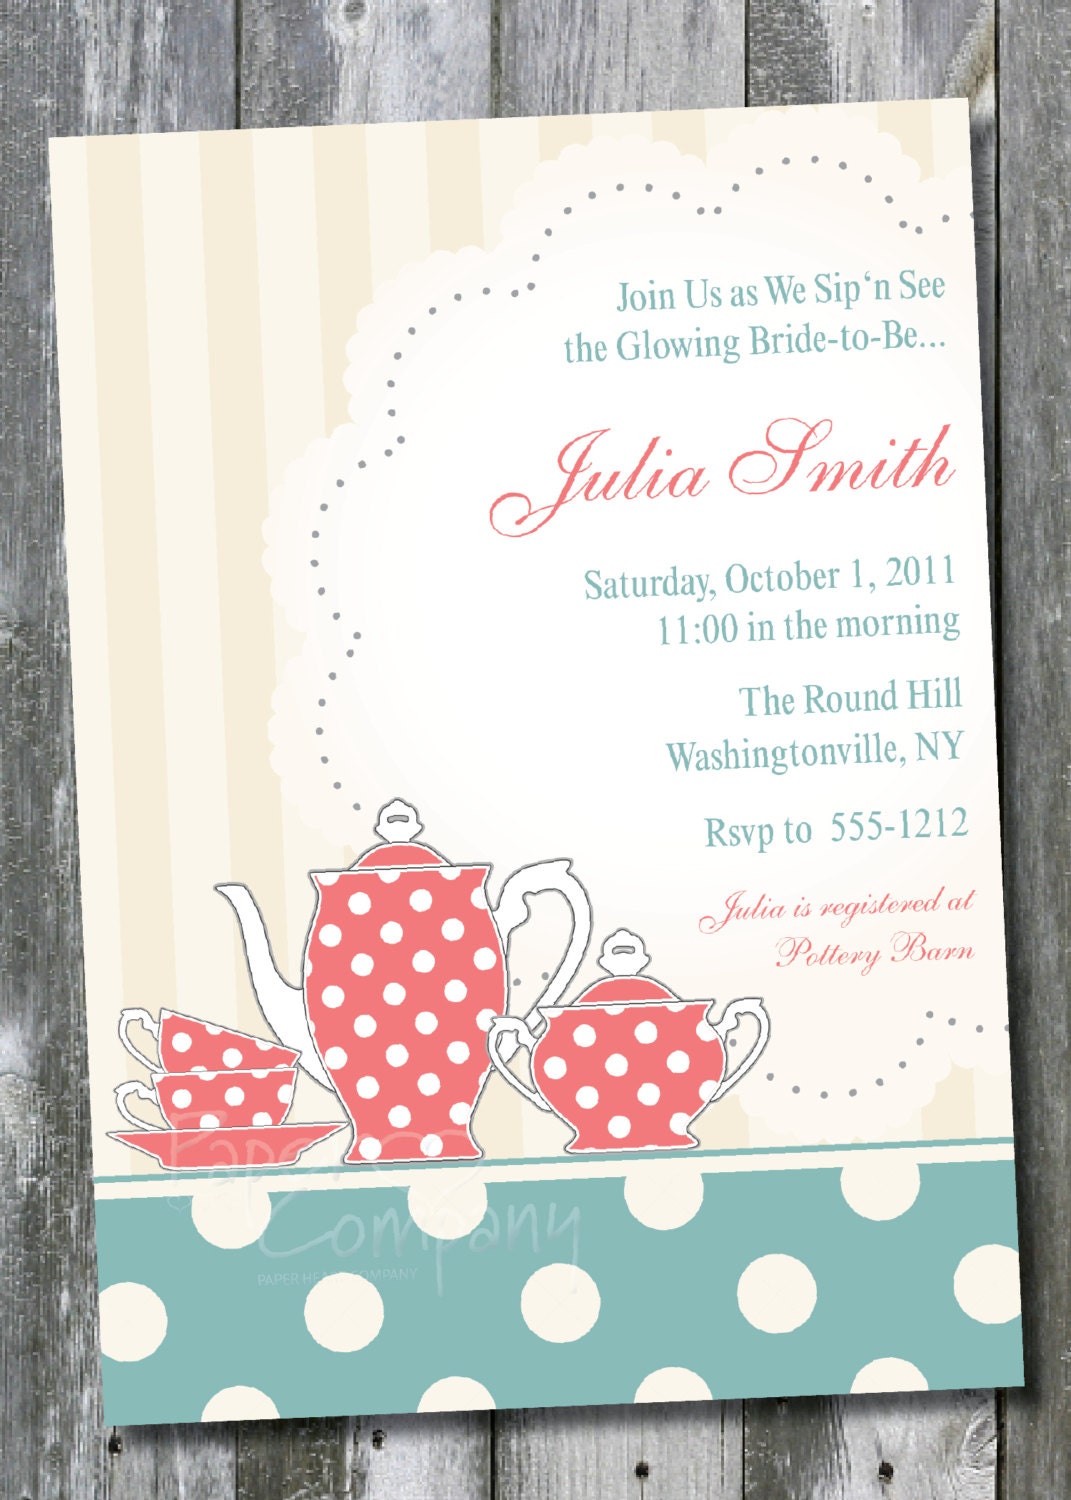 ... designs and coordinate events or Baby Shower Invitations at Walgreens